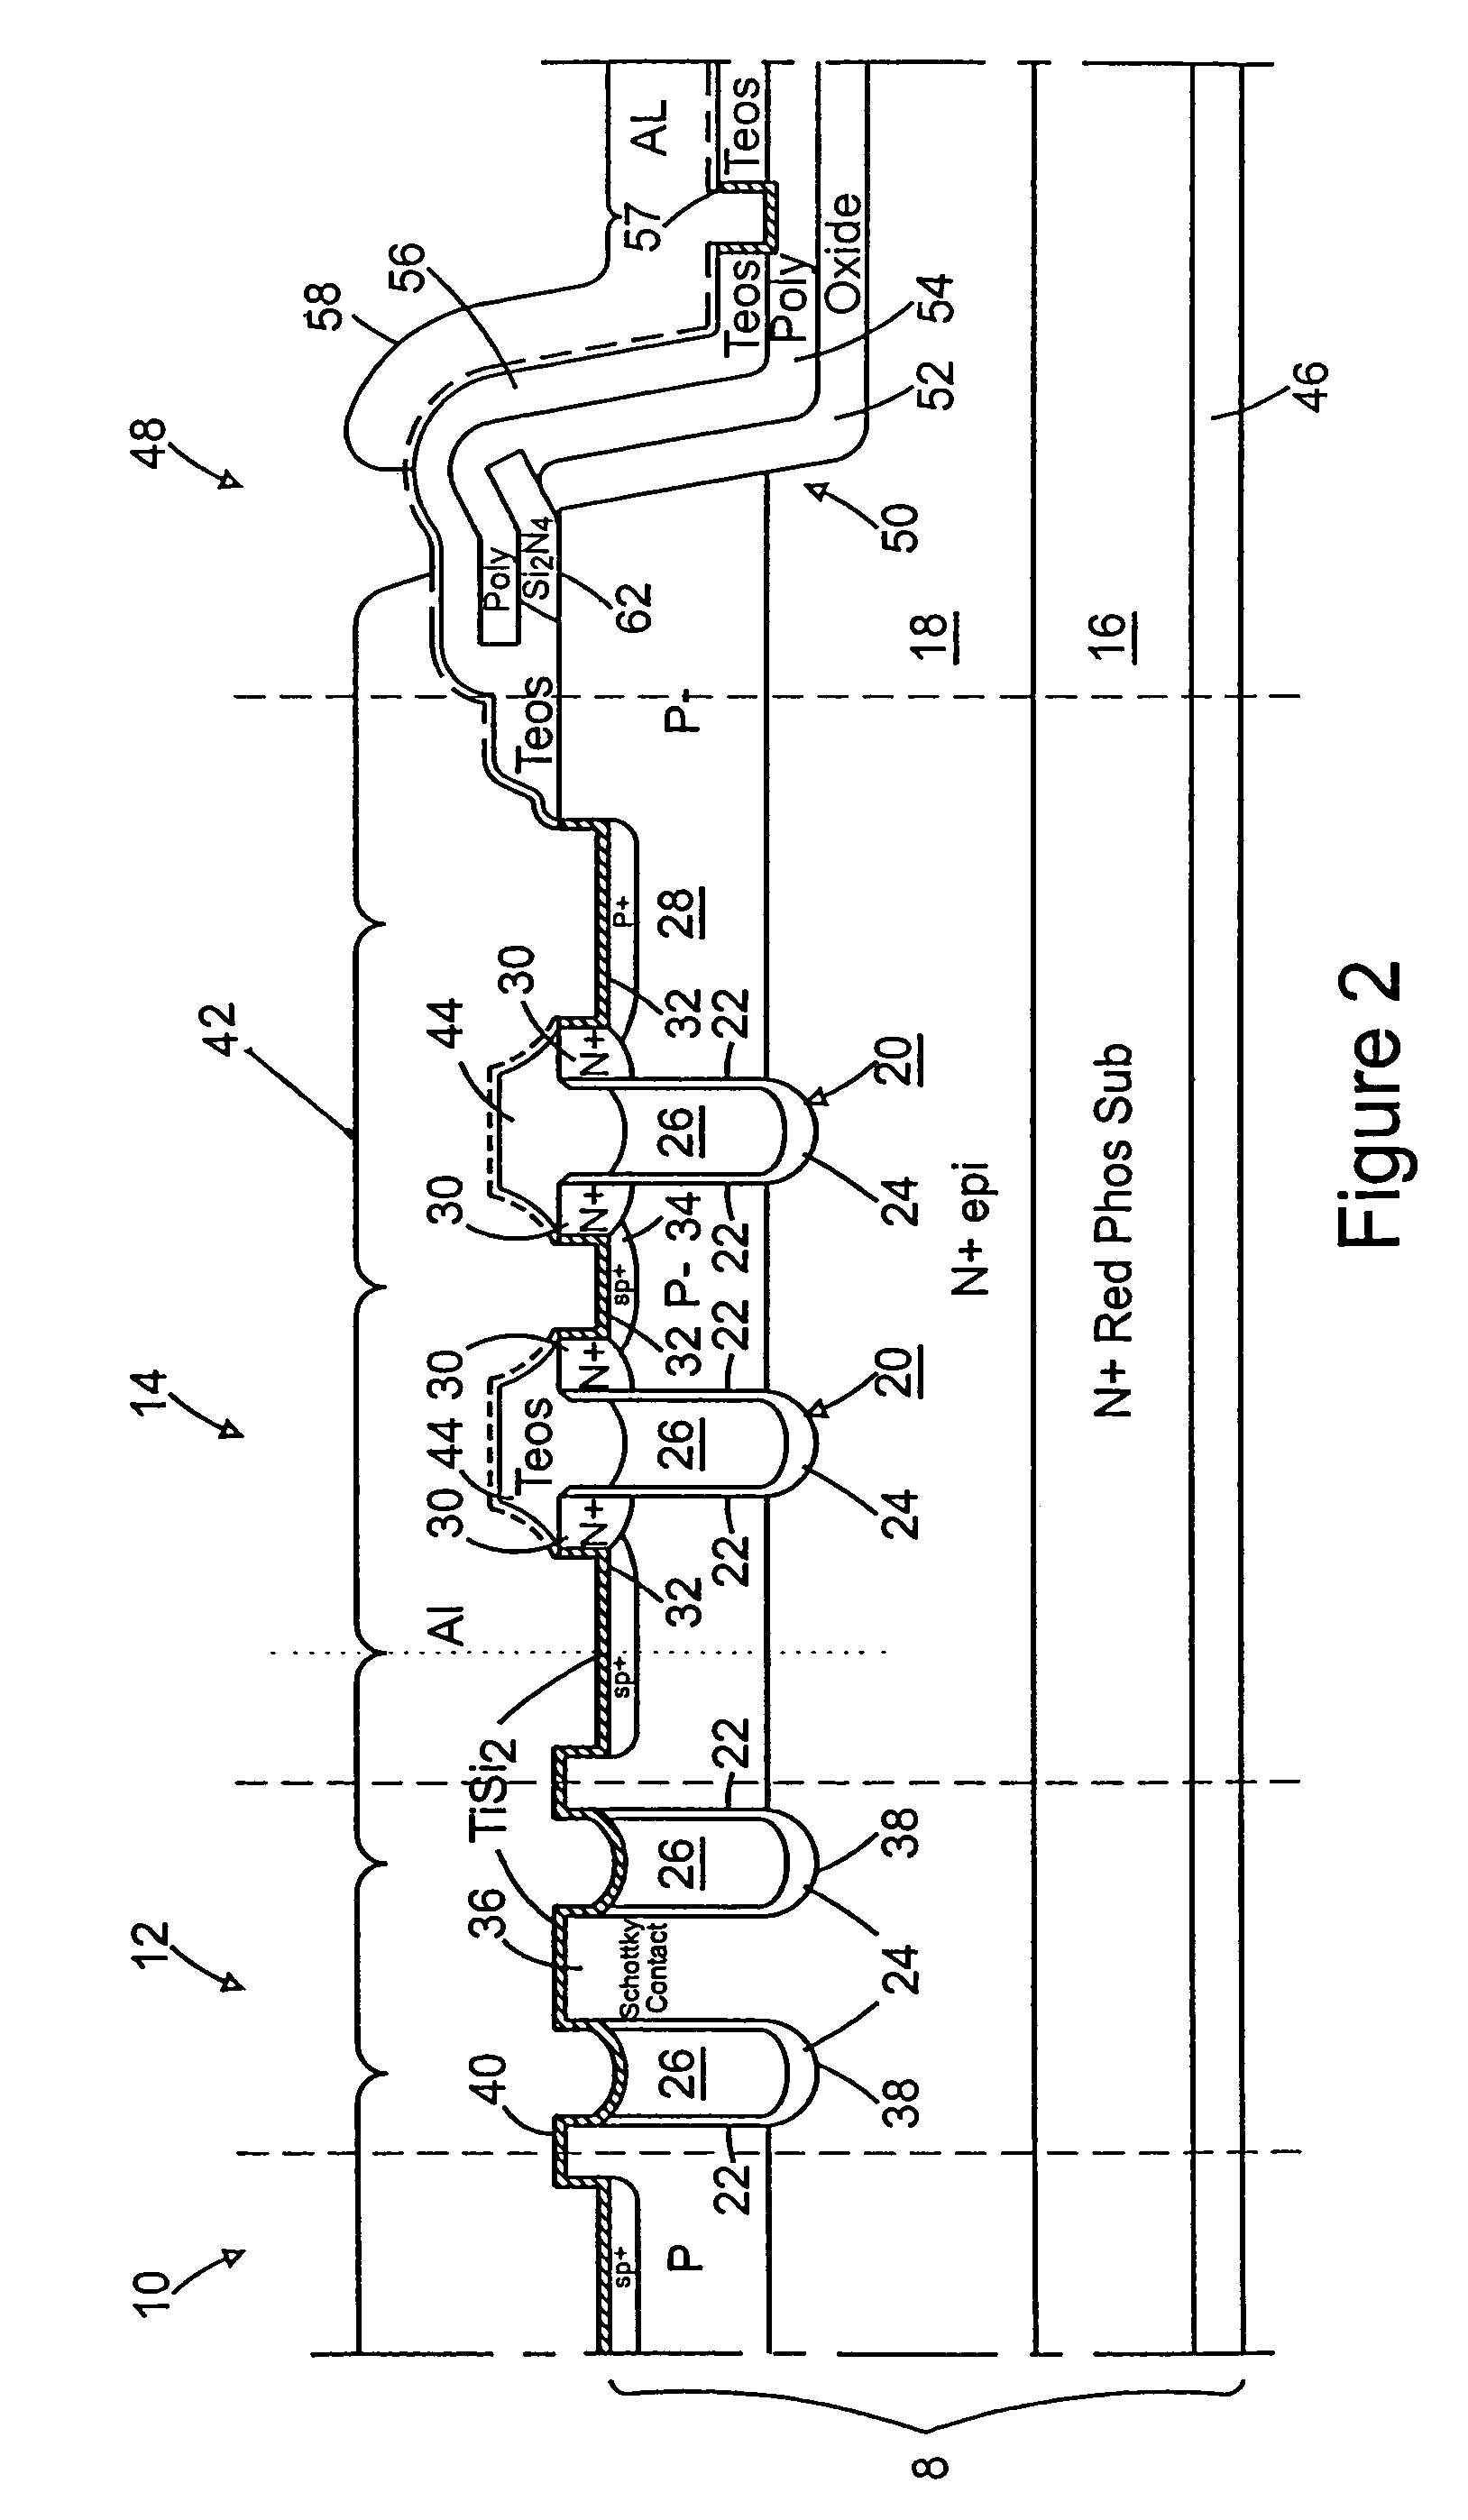 Integrated FET and schottky device